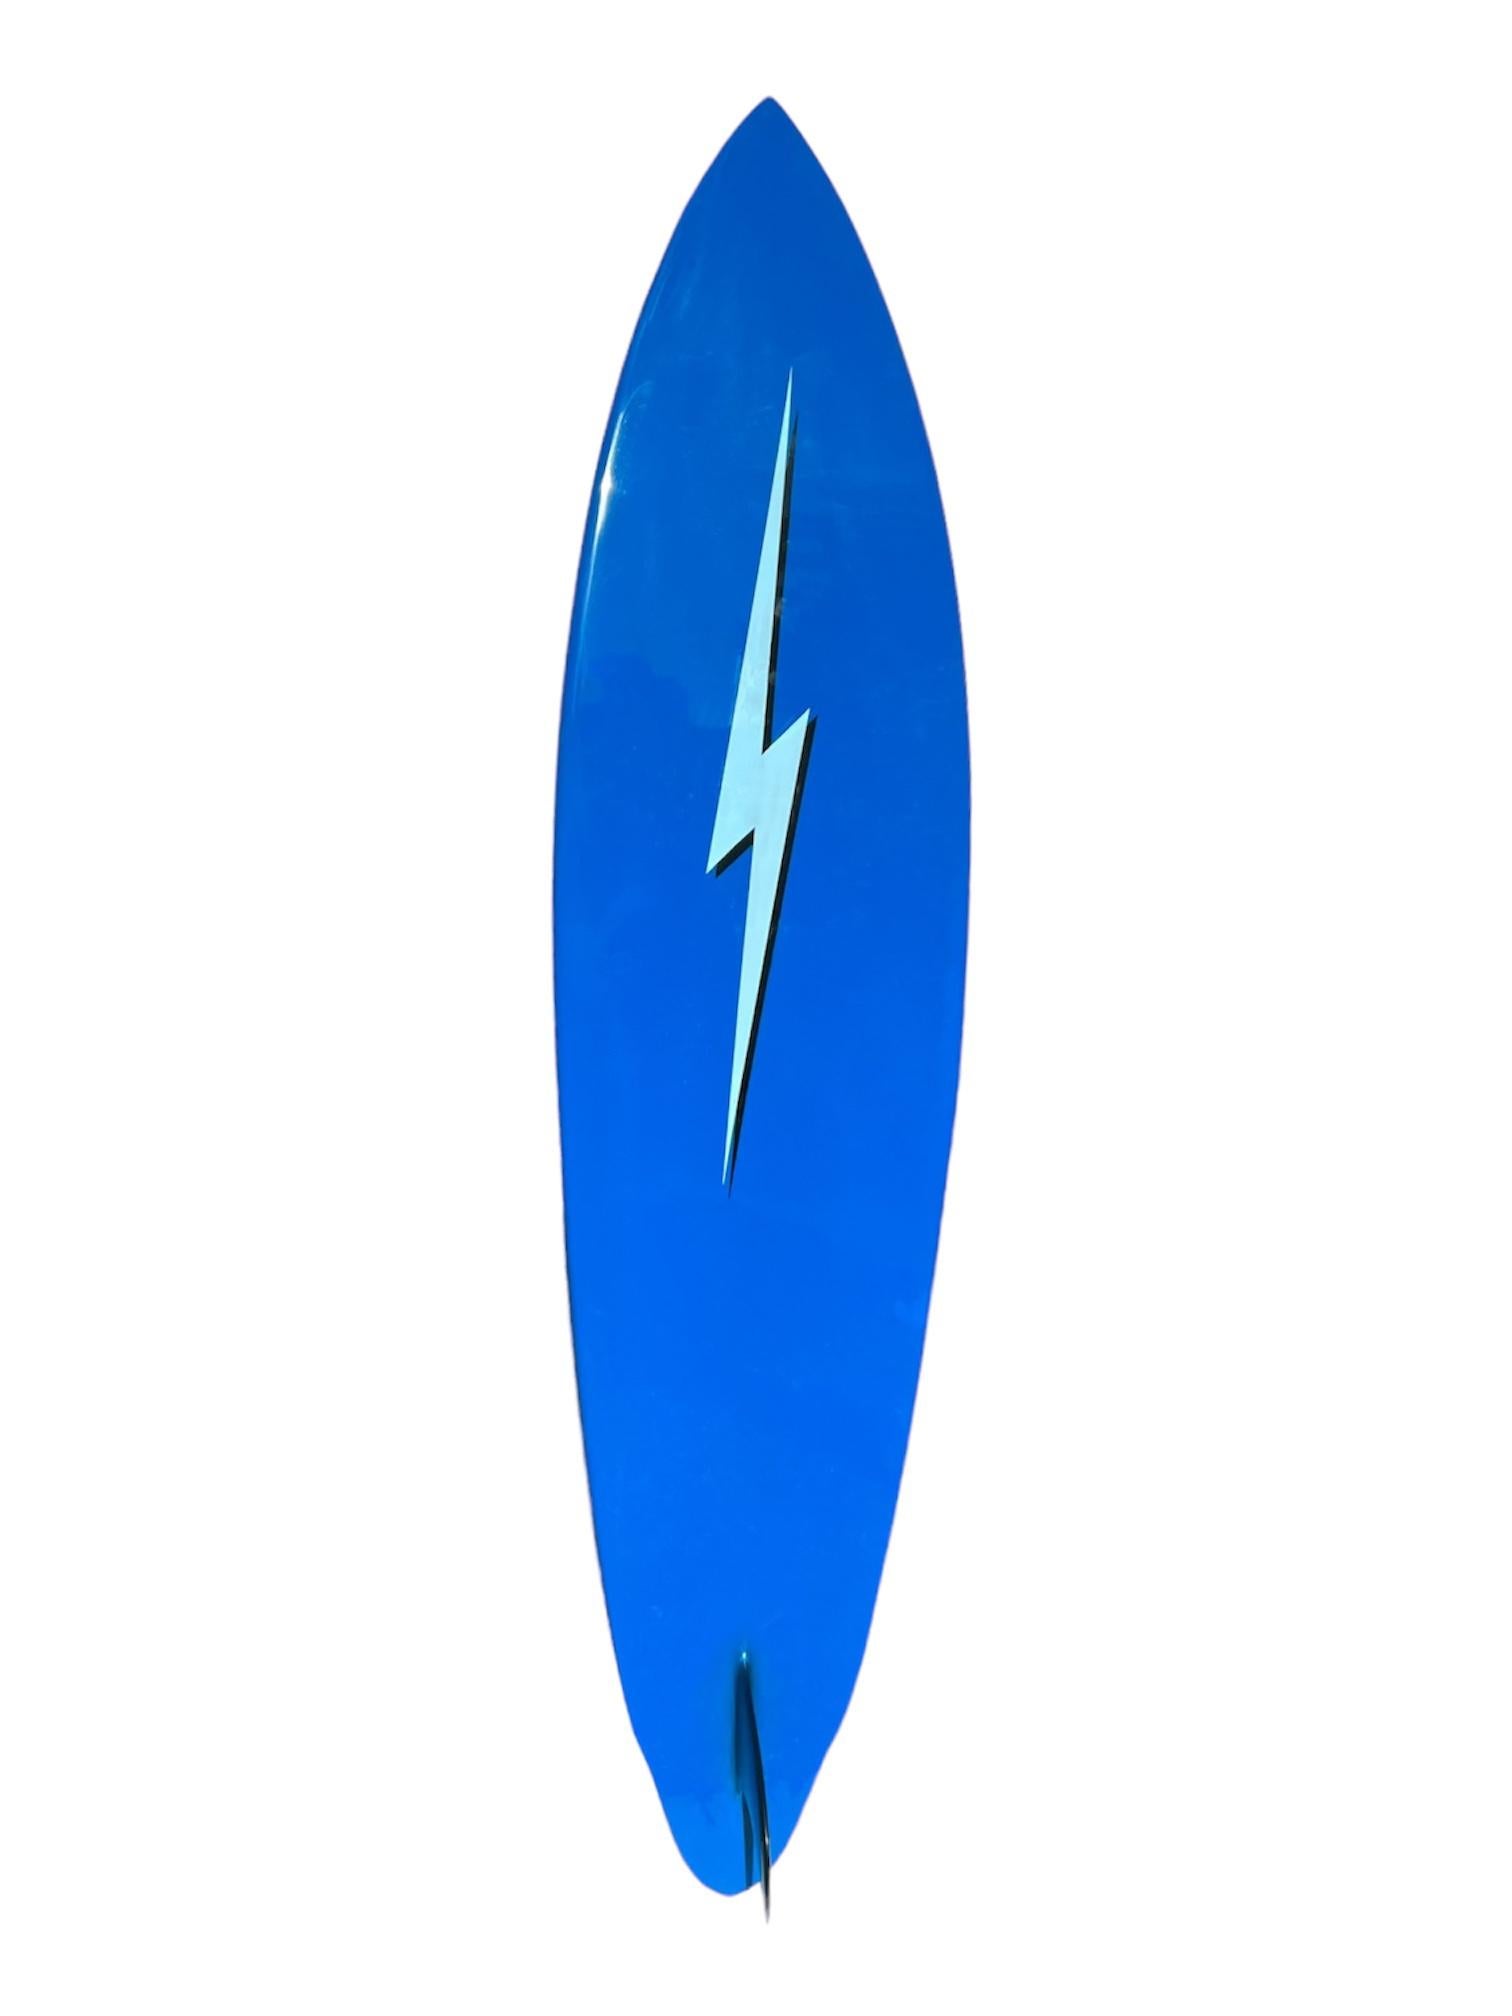 Mid-1970s Vintage Lightning Bolt surfboard made by Barry Kanaiaupuni. Features stunning blue shades with visually enhancing black shadows. Complimented by intricate rail lightning bolts that transform into pinstripes outlining the entire board. A